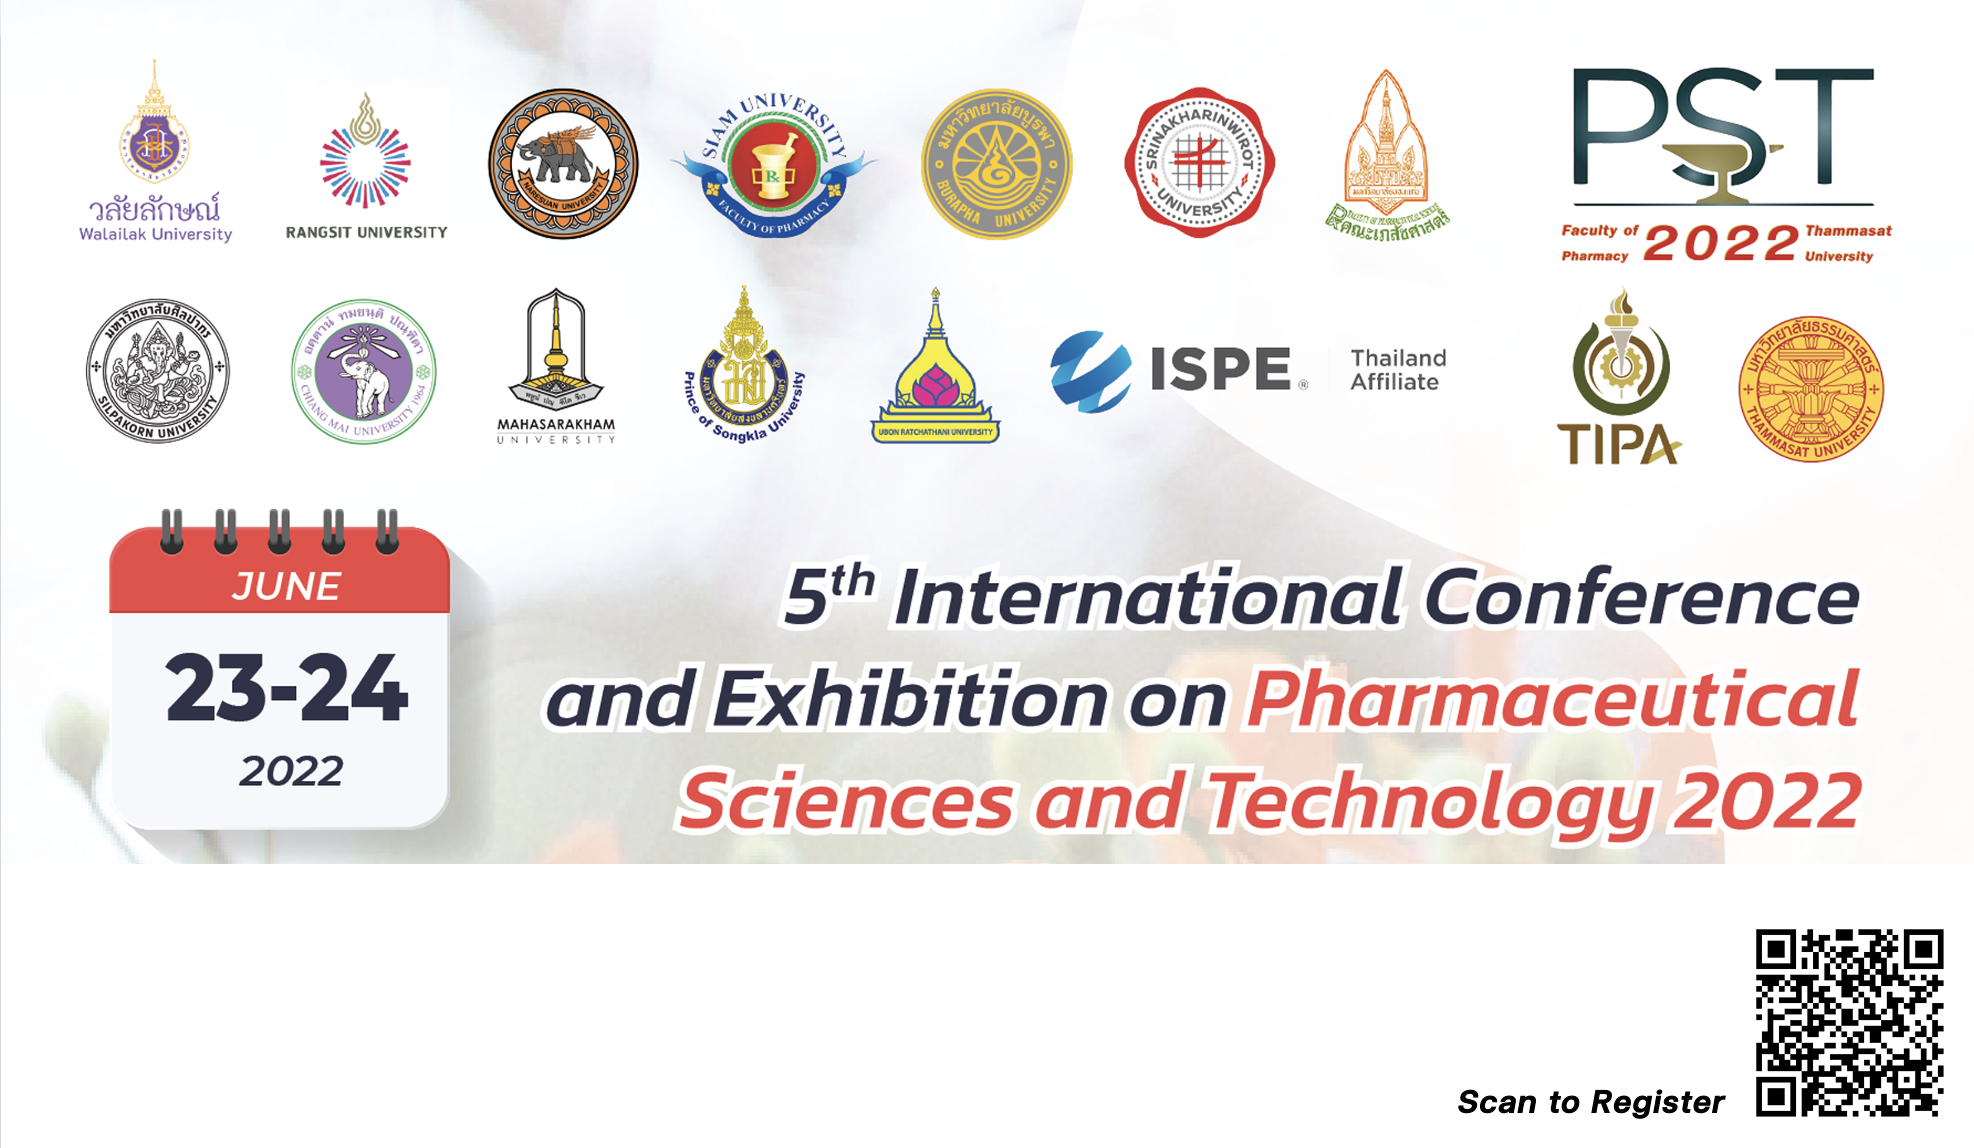 PST2022 - Innovations in Pharmaceutical Sciences for Sustainable Development Goals